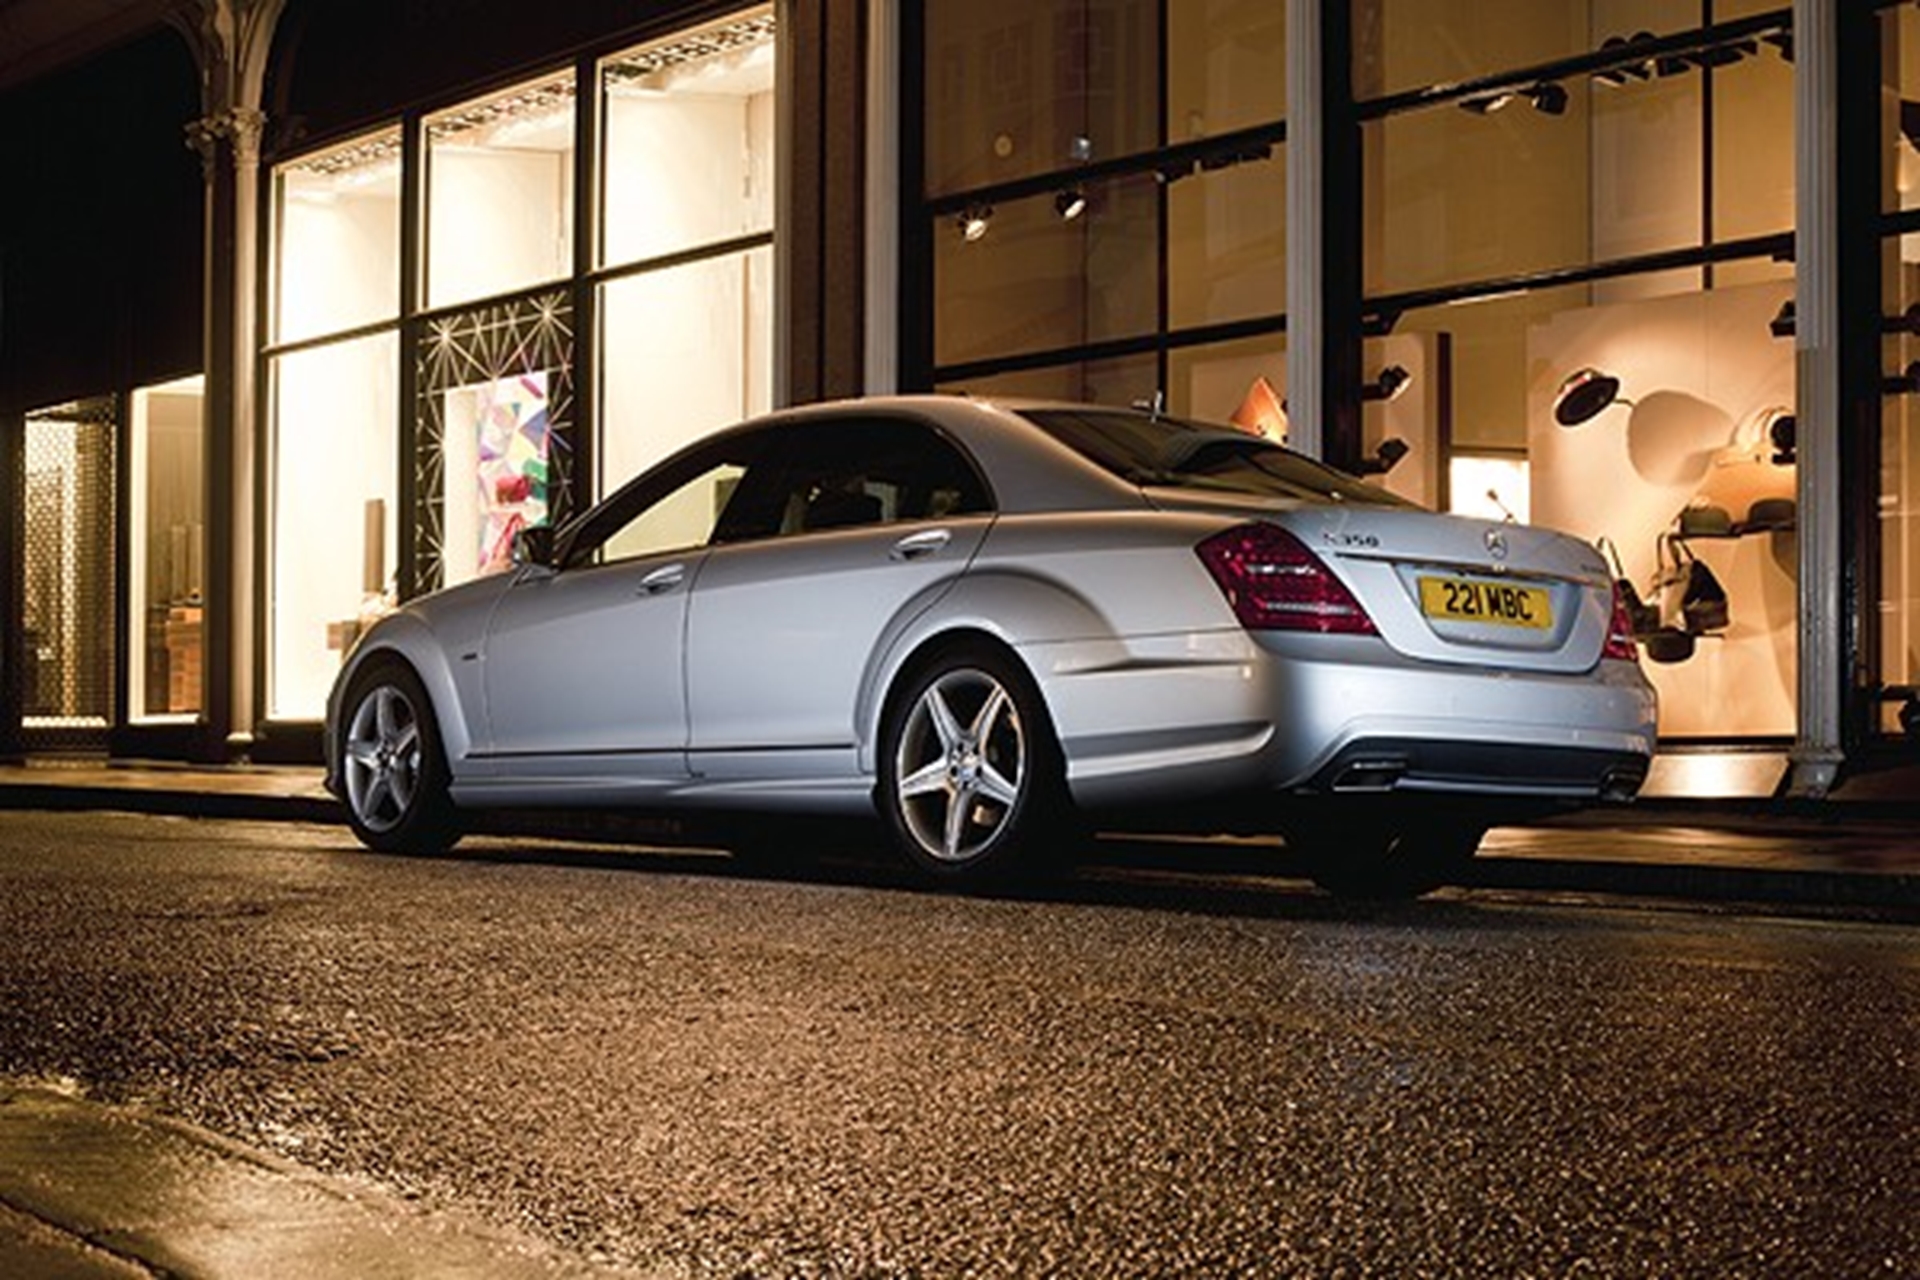 MERCEDES-BENZ UK ROLLS OUT ITS LOW-EMISSIONS CHAMPIONS TO DELIVER THE STARS TO THE 2012 LAUREUS WORLD SPORTS AWARDS